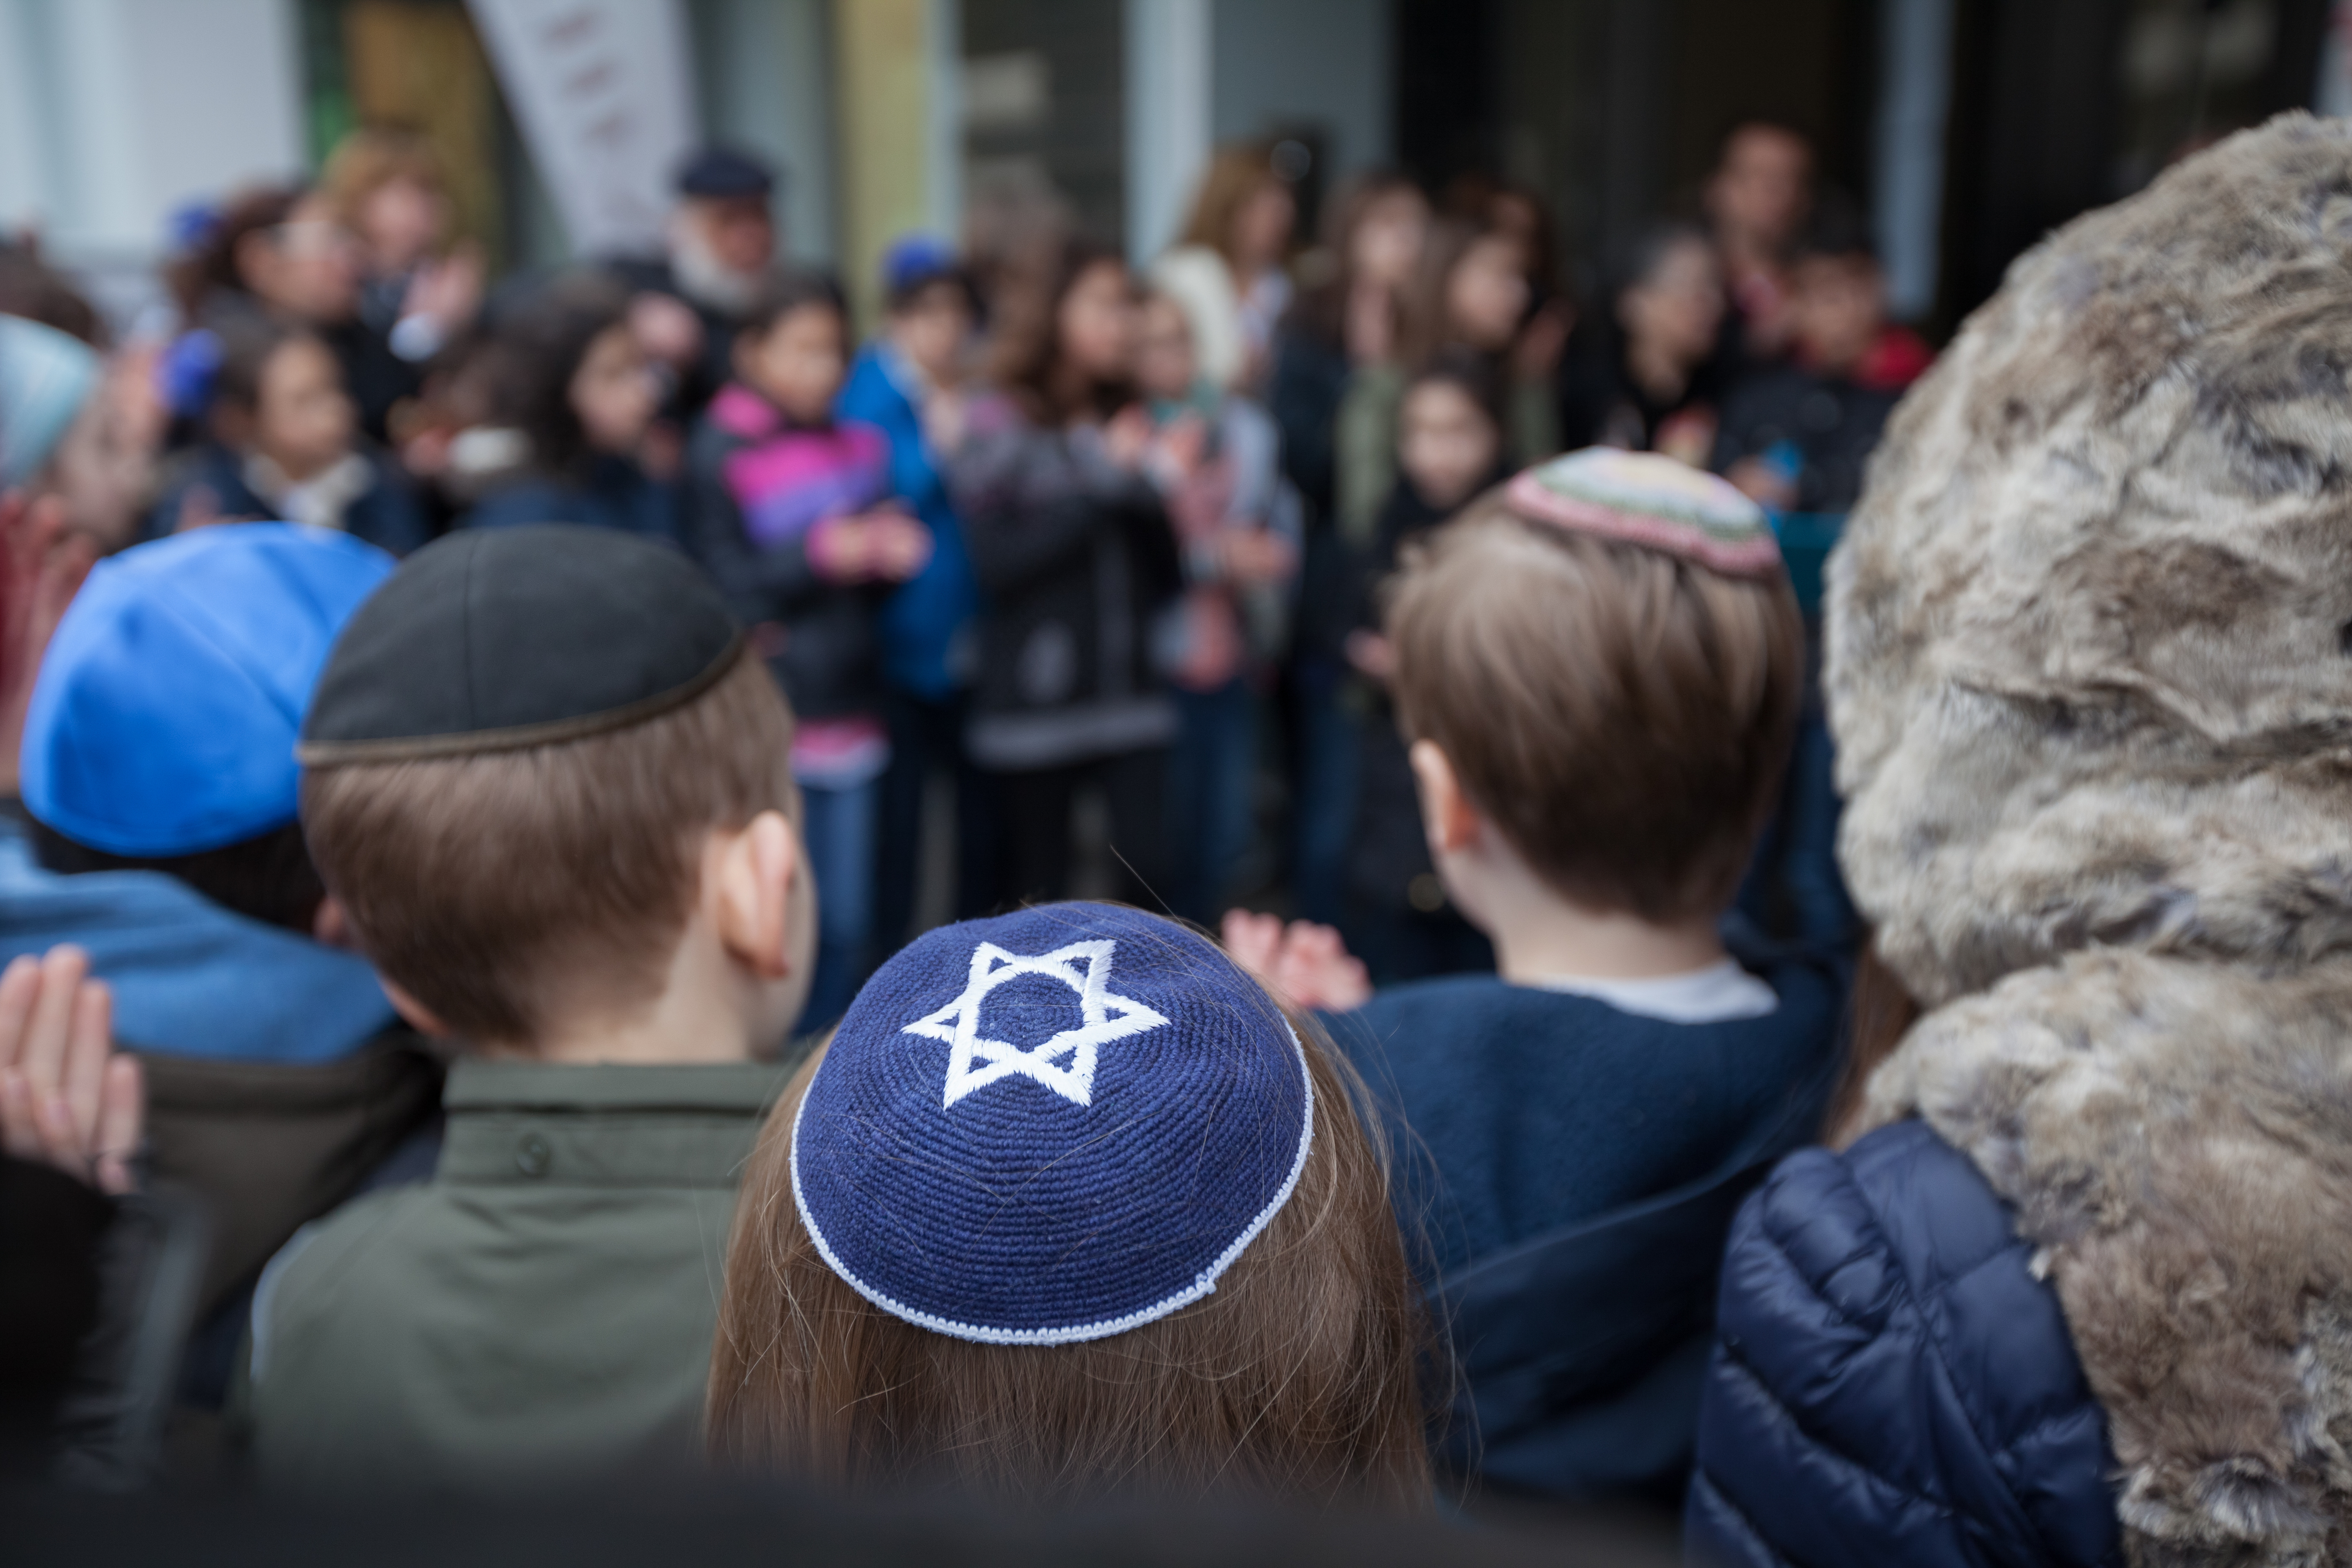 Garrison and Traficant: Anti-Semitism is on the Rise